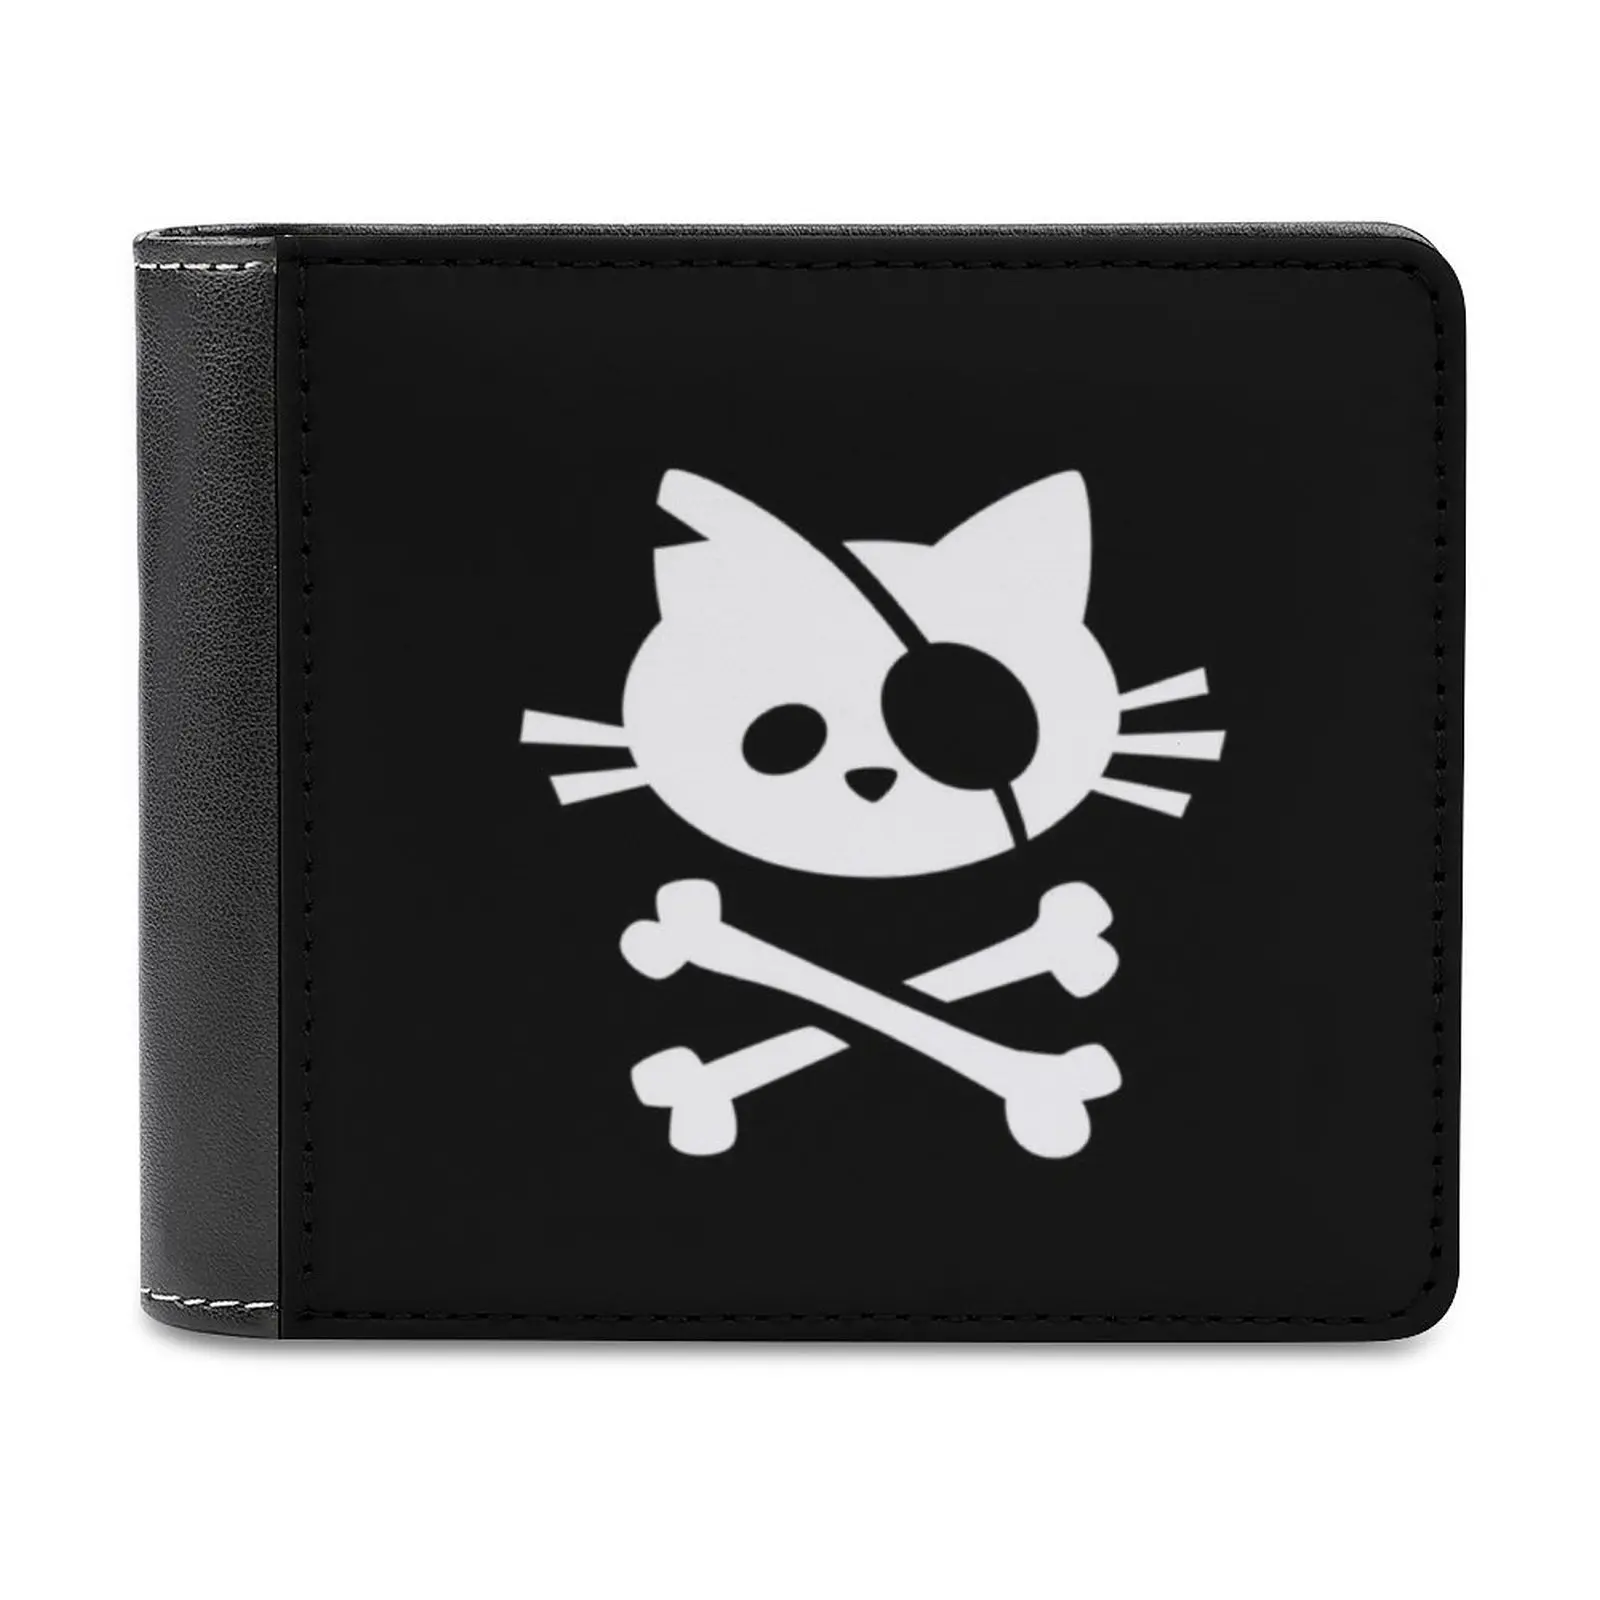 

Cute Pirate Cat Skull And Crossbone Leather Wallet Men's Wallet Purse Money Clips Pirate Pirates Cat Cats Funny Humor Humorous